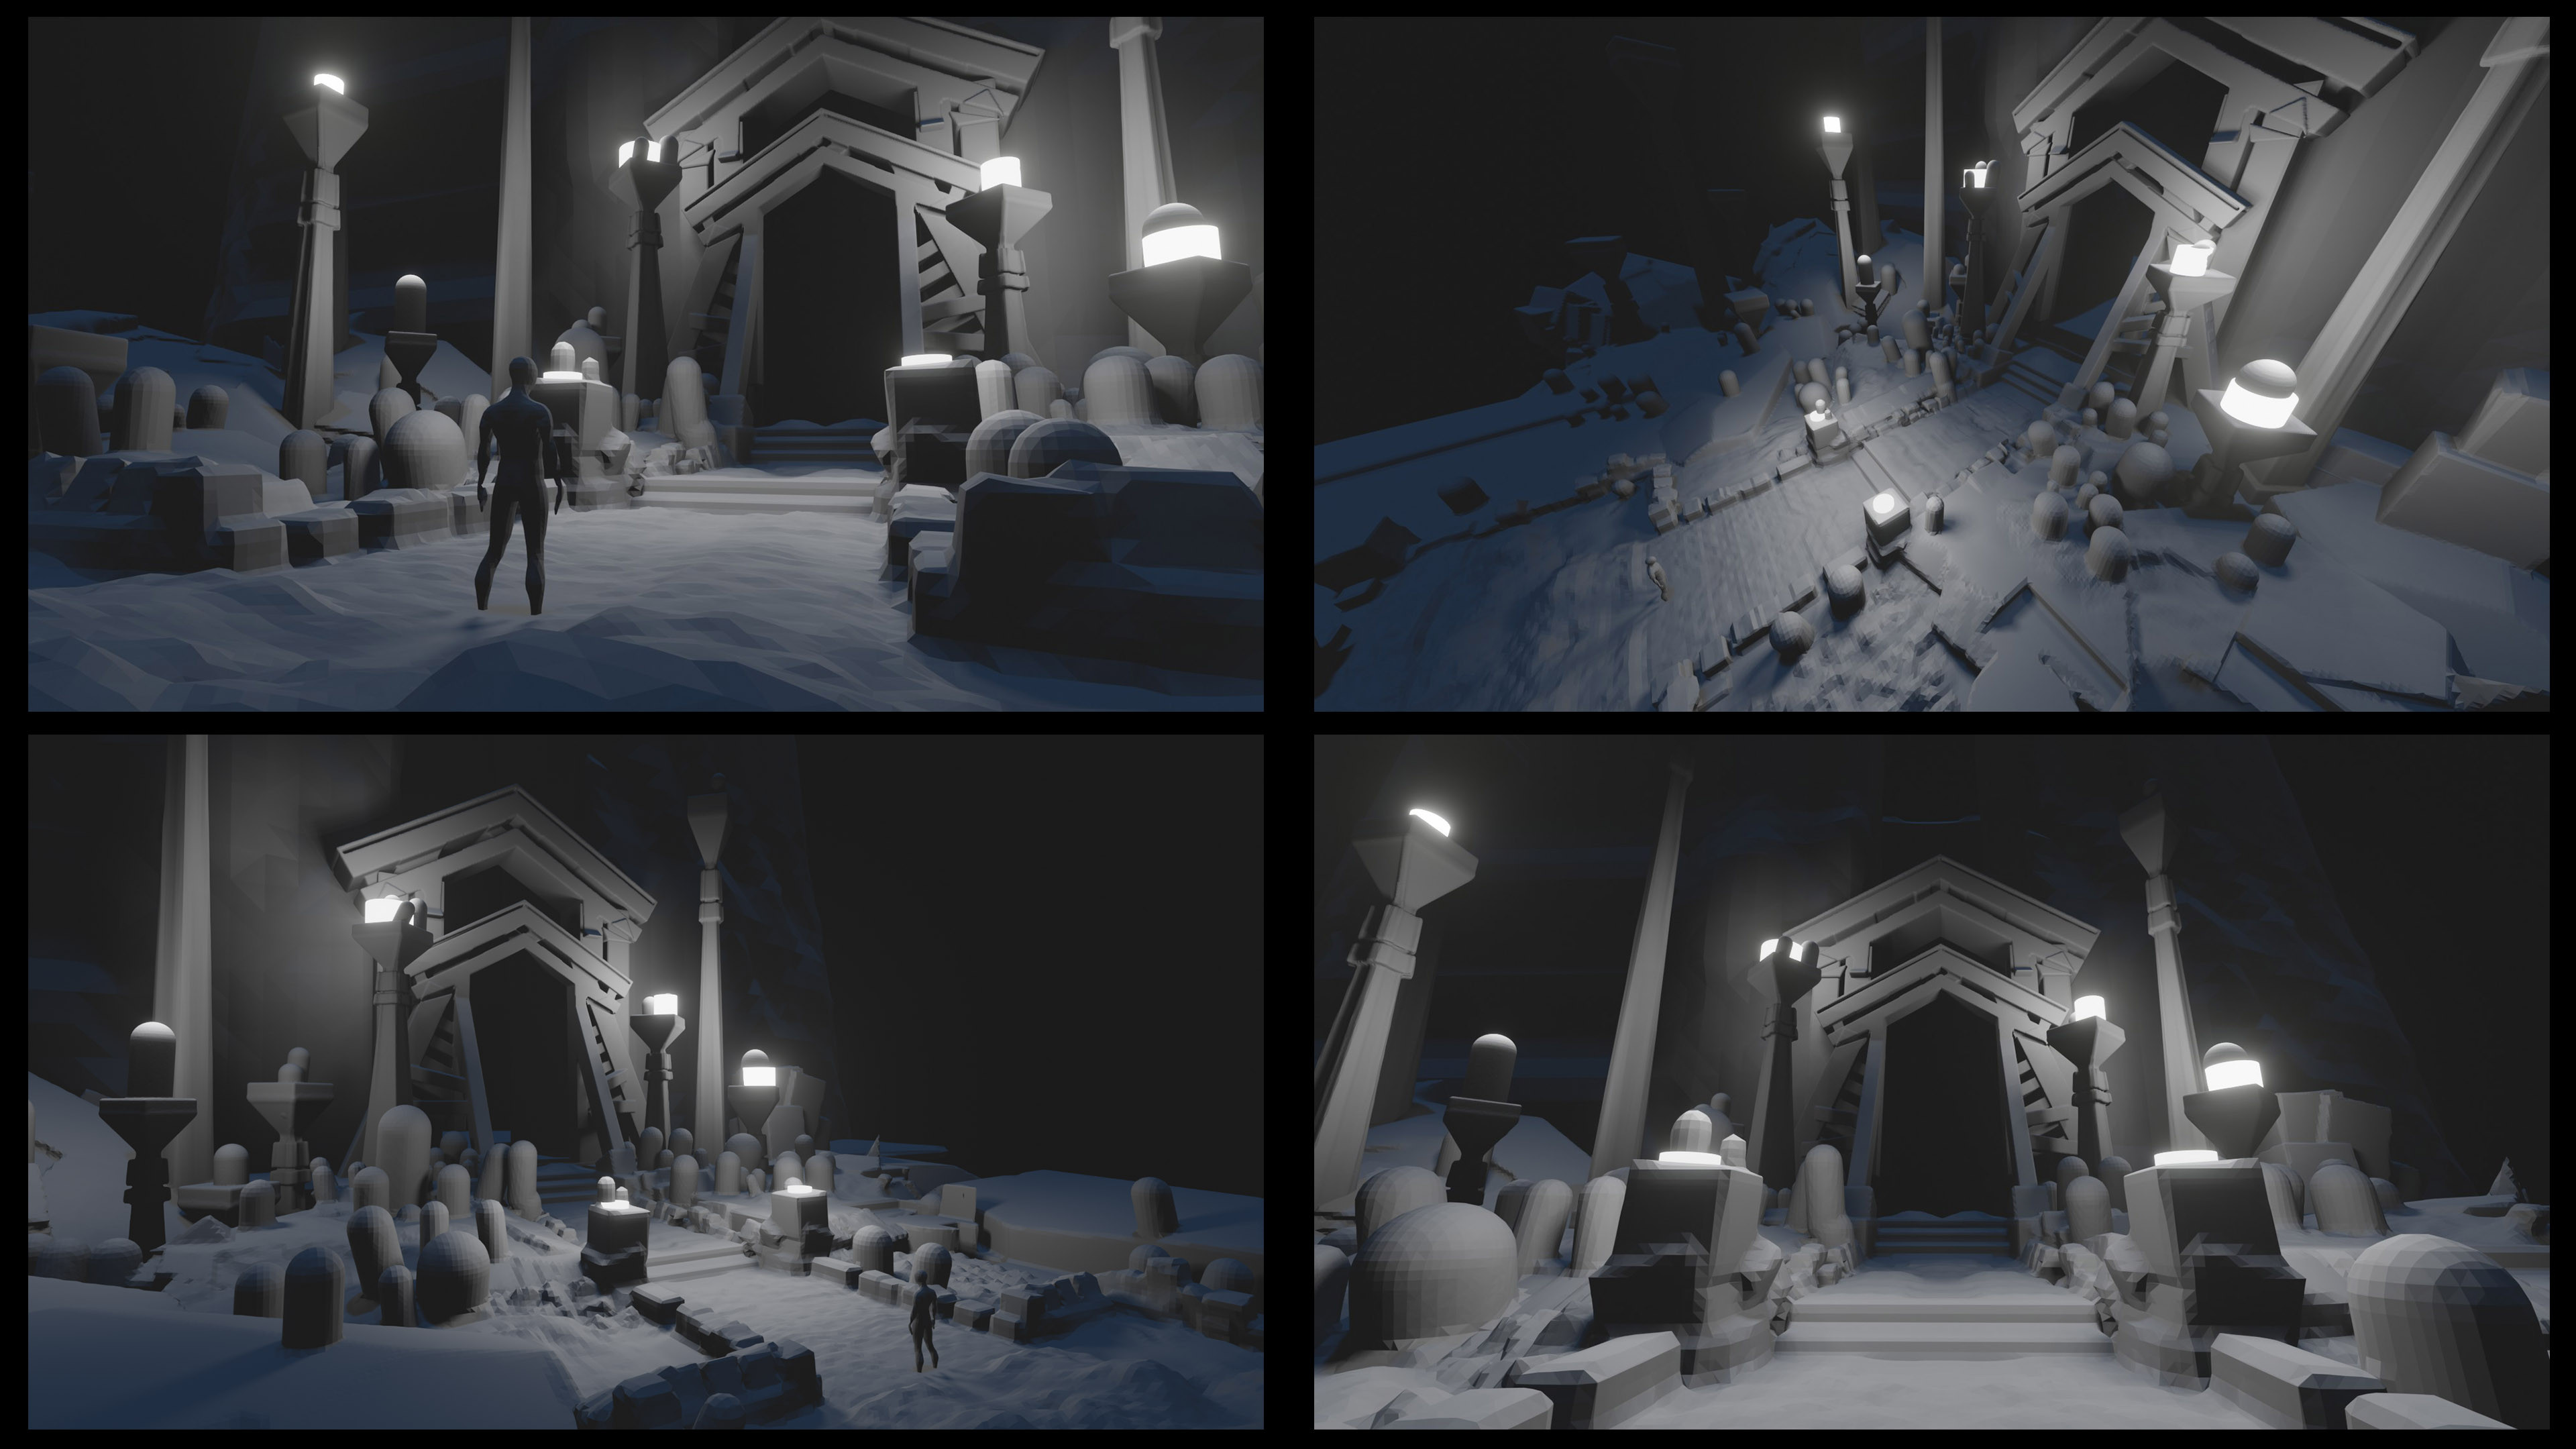 3DCoat and Blender were used for the initial blockout, explore lighting and shot options, and was then drawn over.